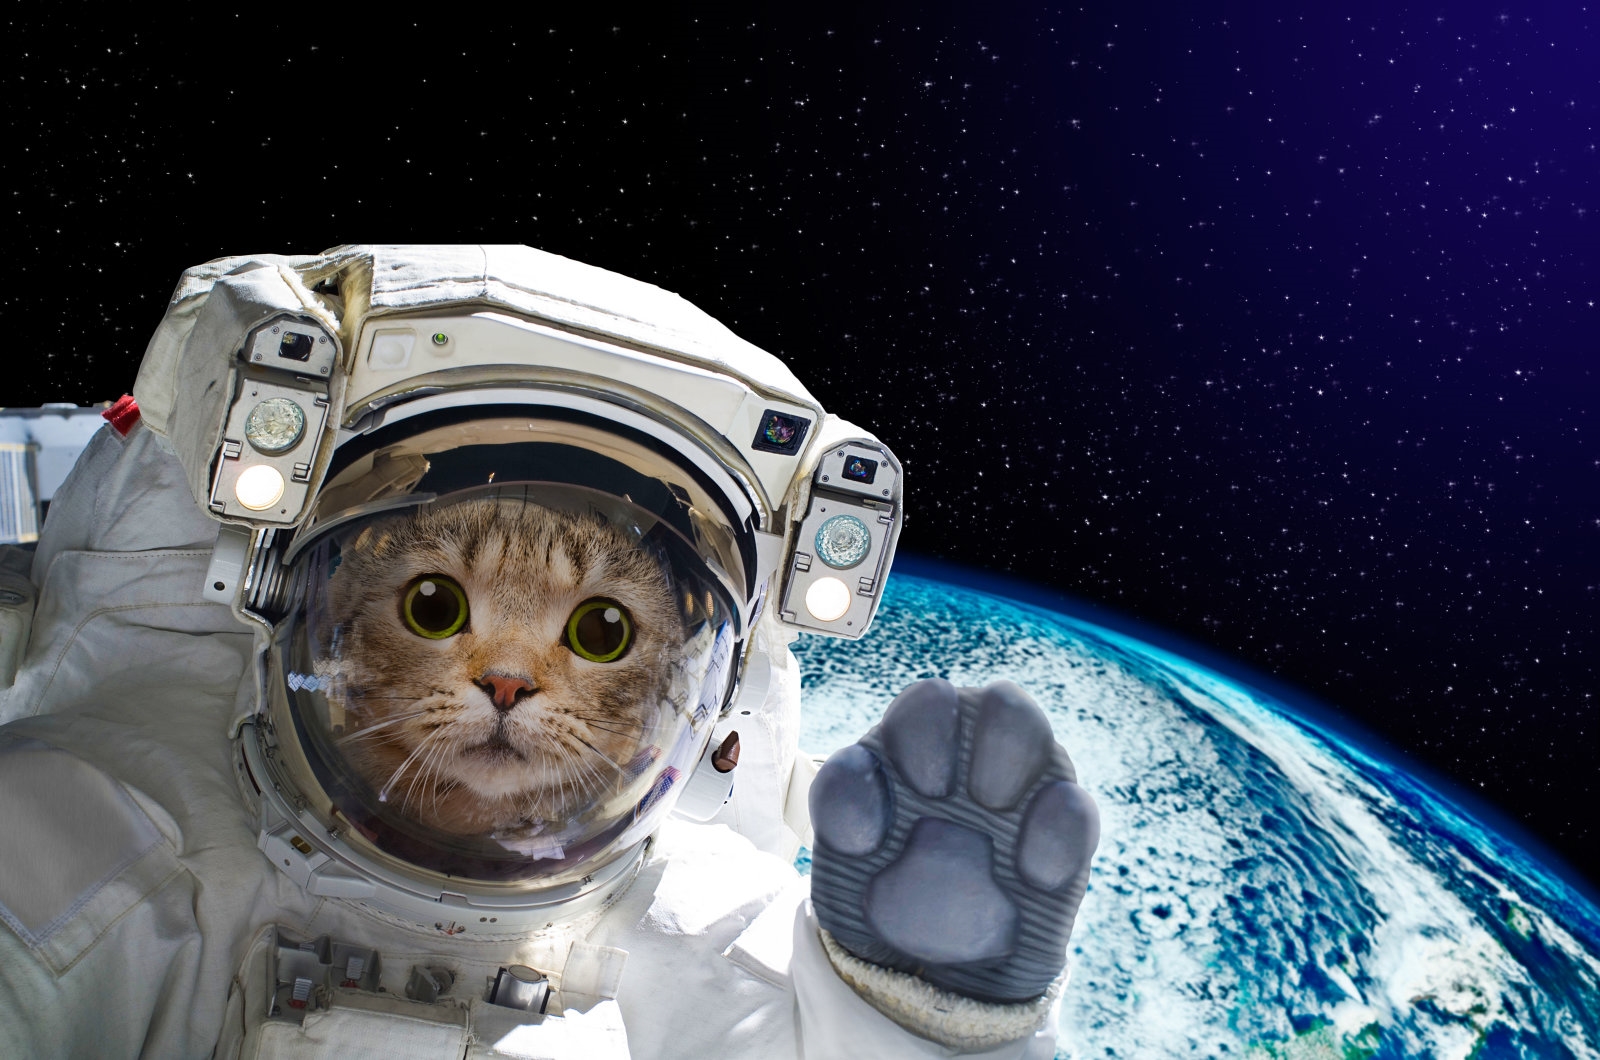 Hitting the Books: How to sling a cat through interstellar space | DeviceDaily.com